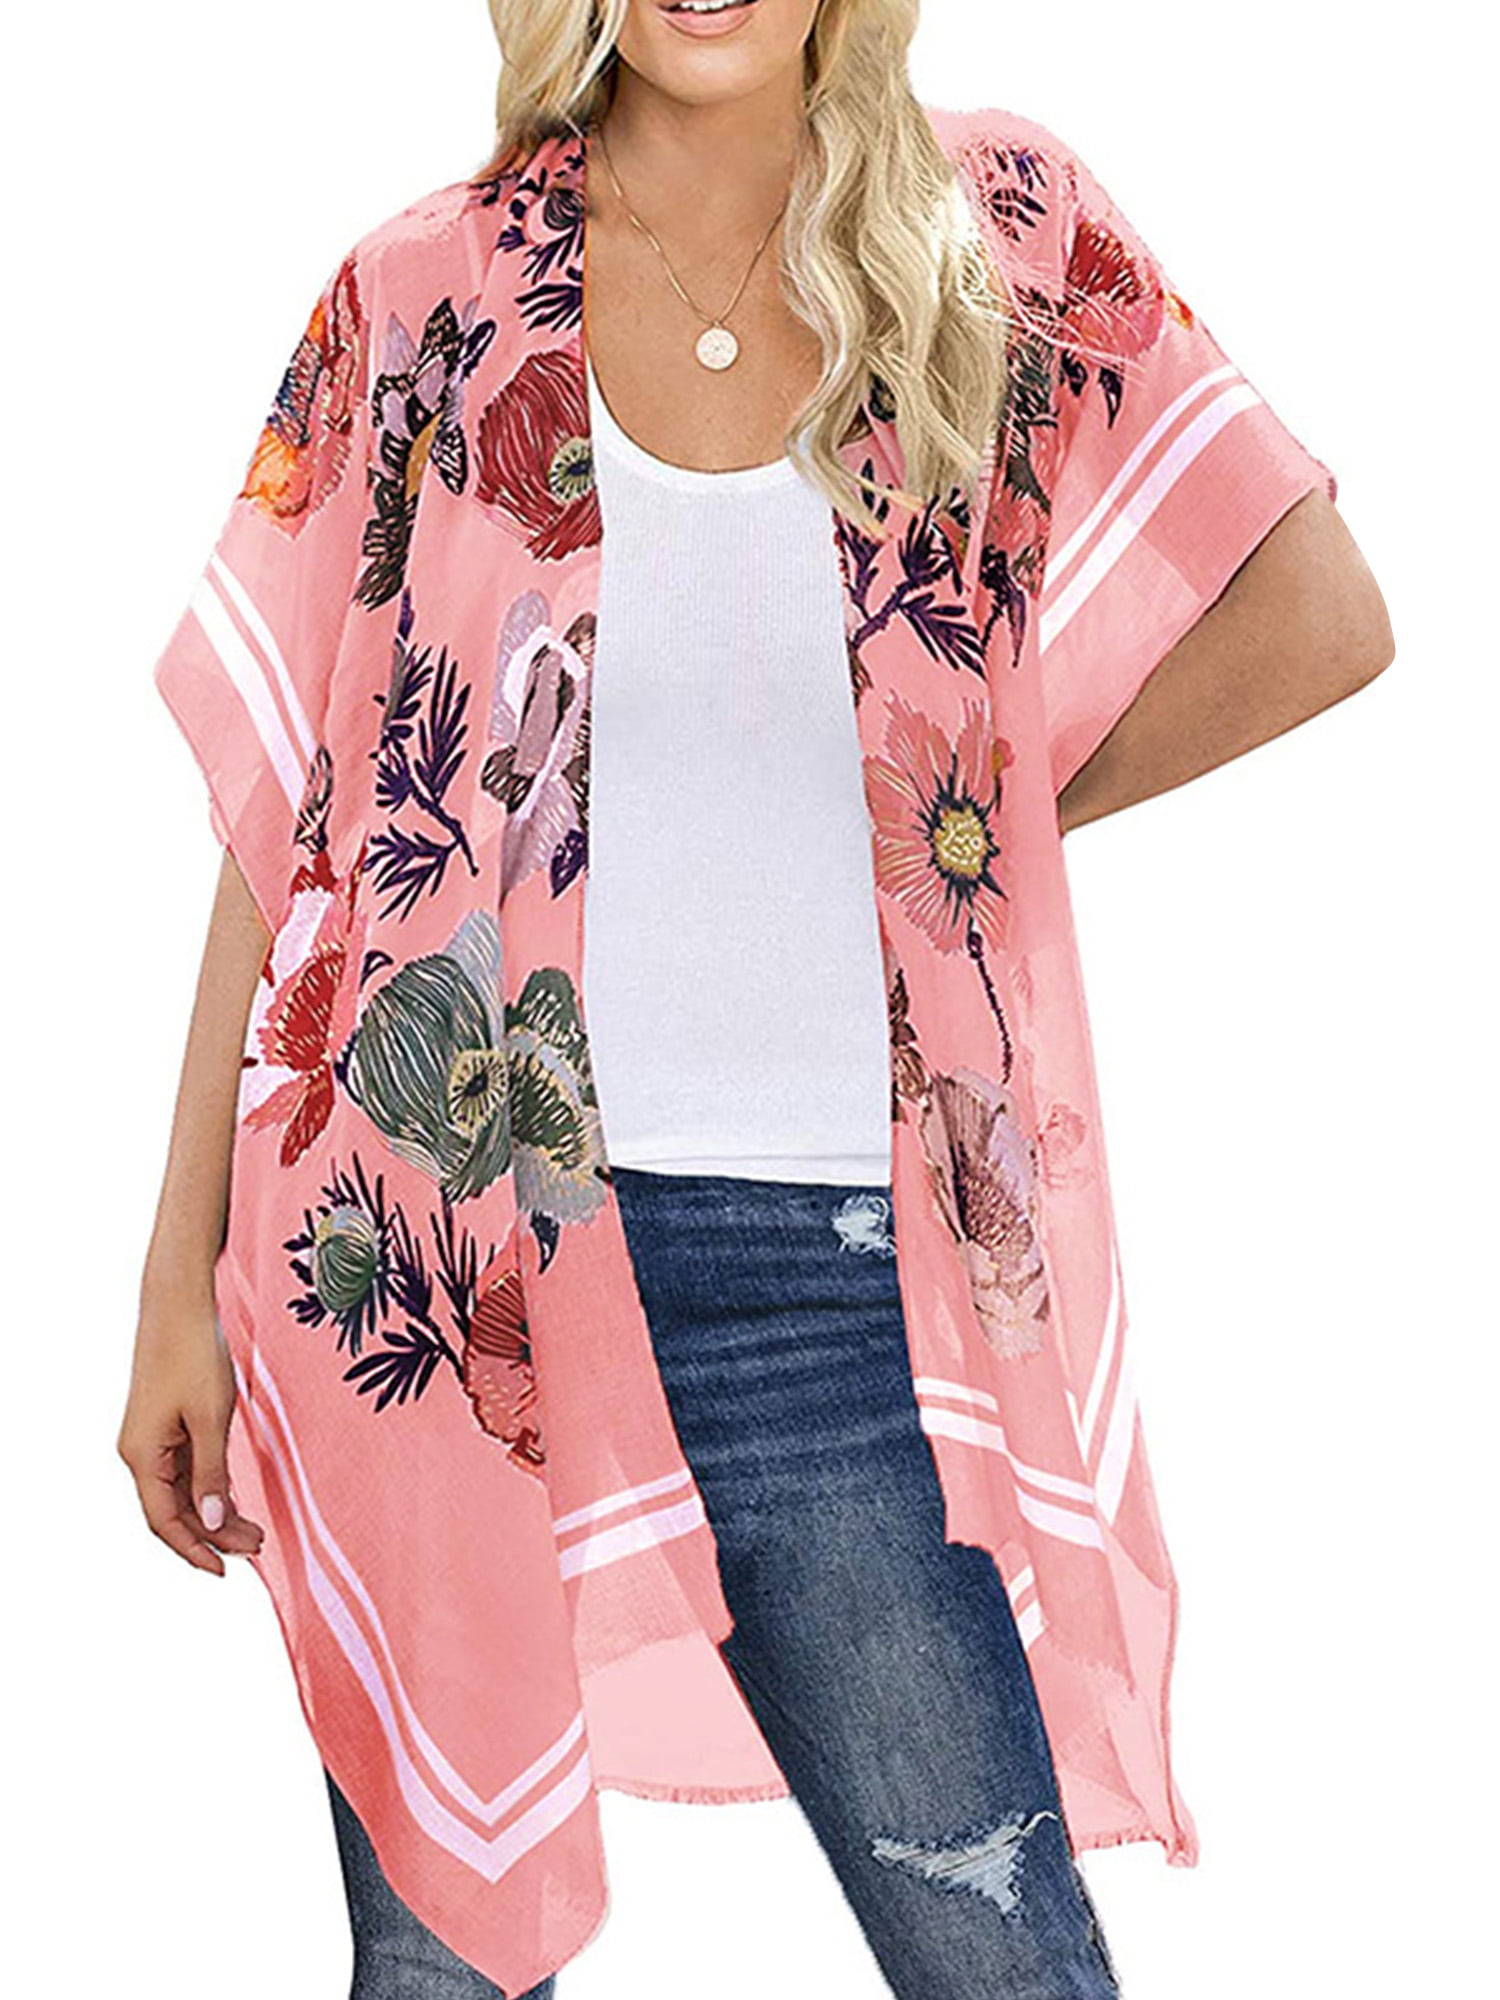 Kimono Cardigans for Women Lightweight Summer Cardigan Floral Open Front Beach Cover Ups Tops 